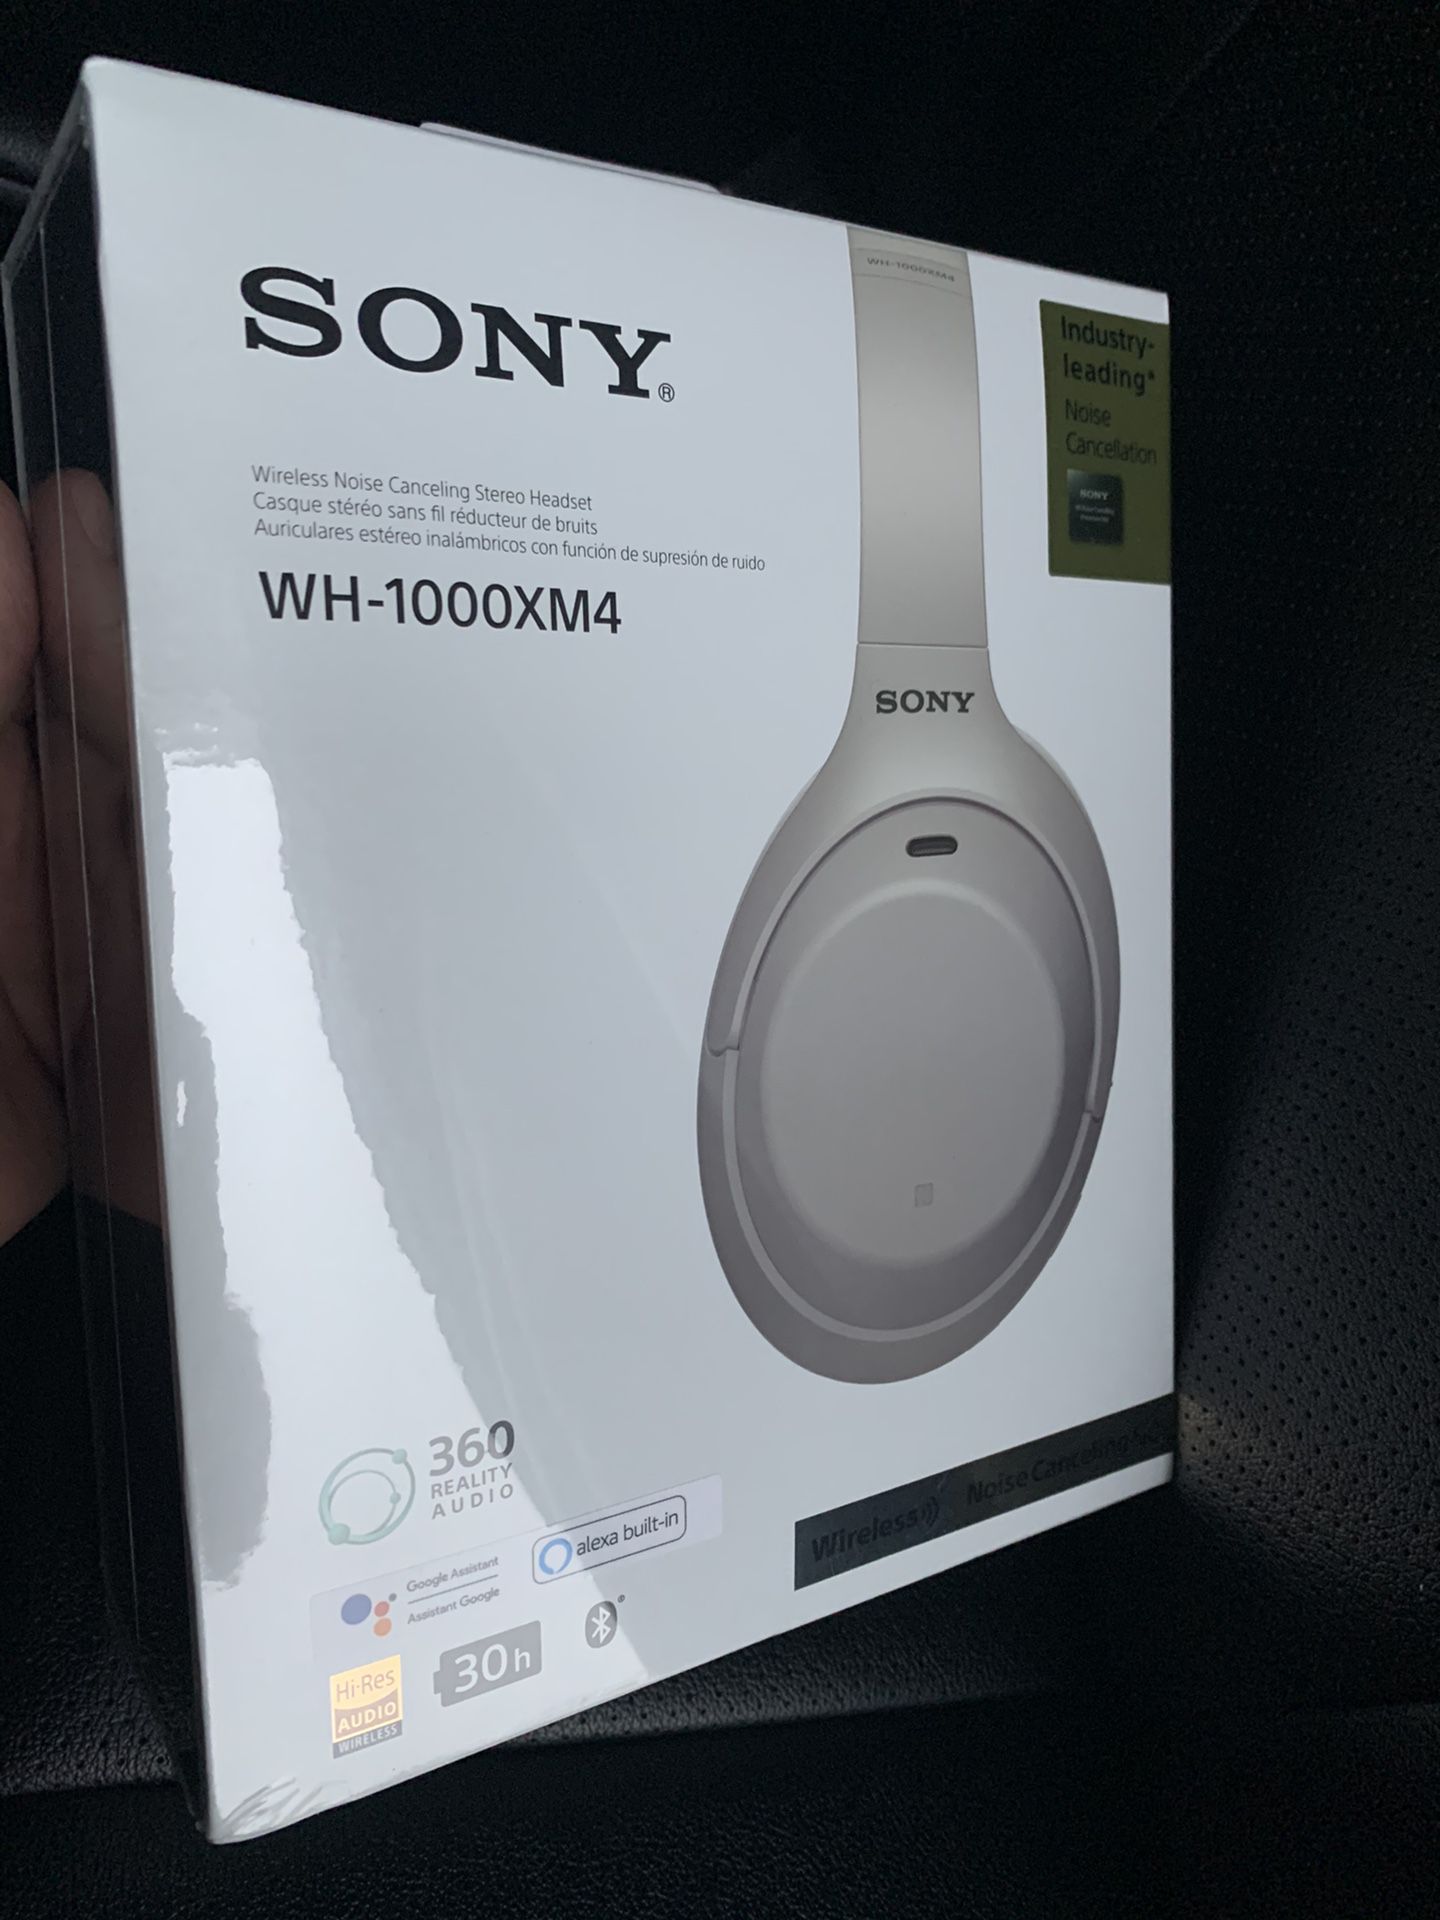 Silver Sony wh-1000xm4